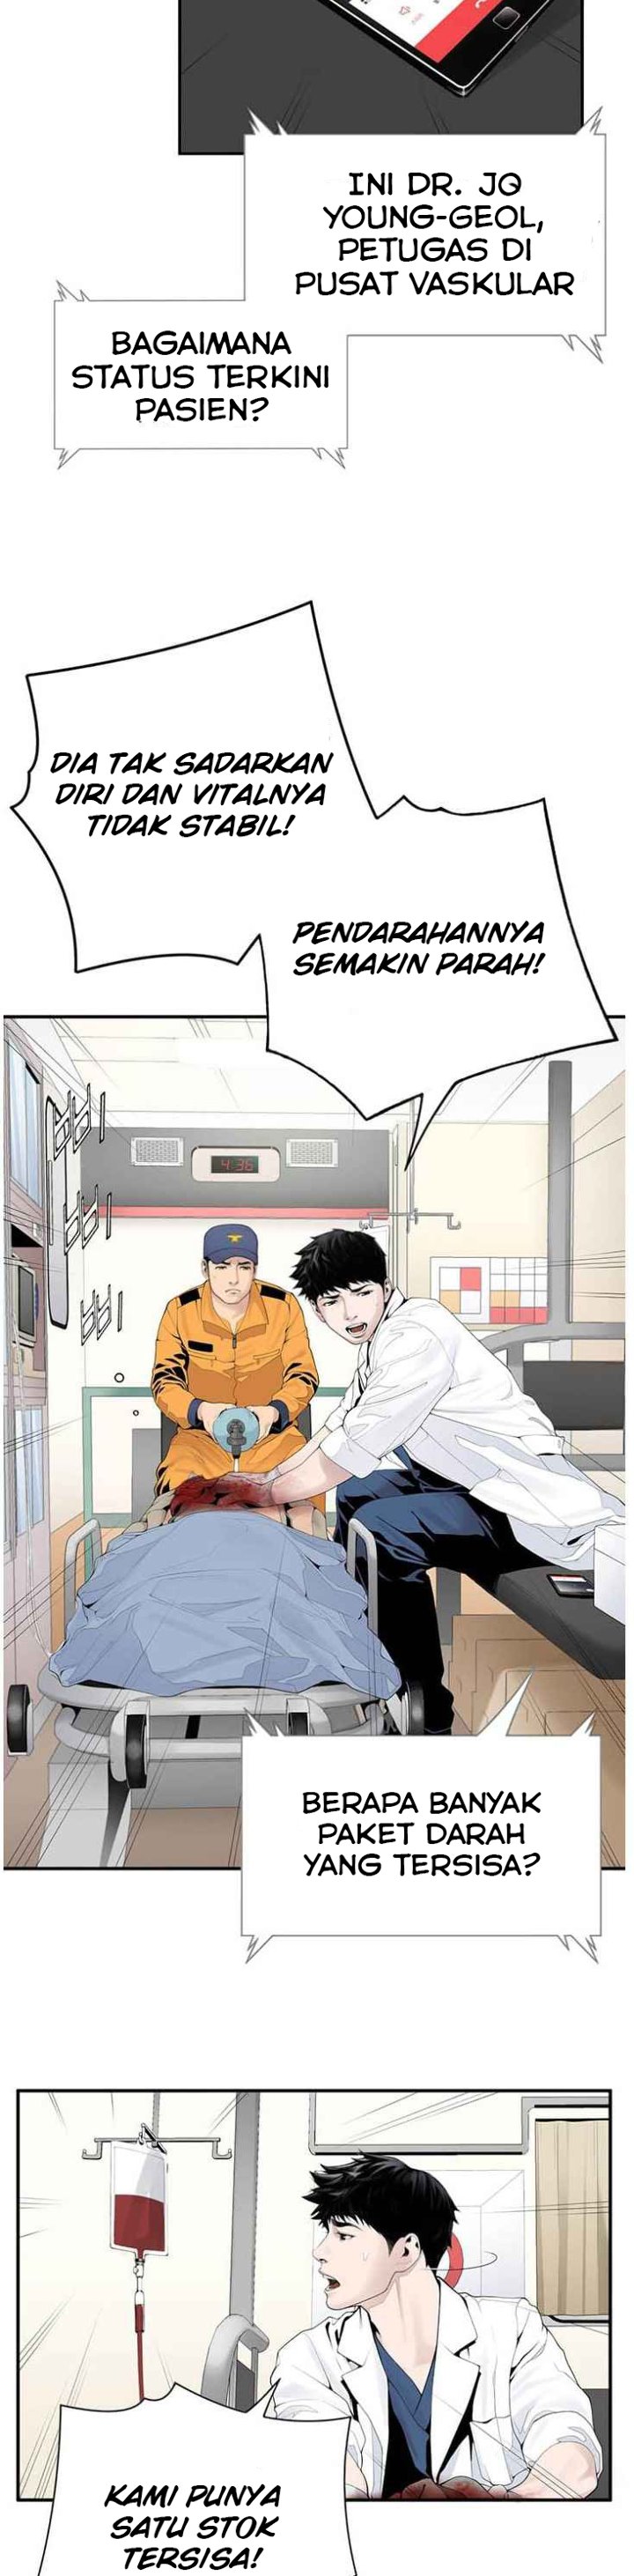 Dr. Choi Tae-Soo Chapter 17